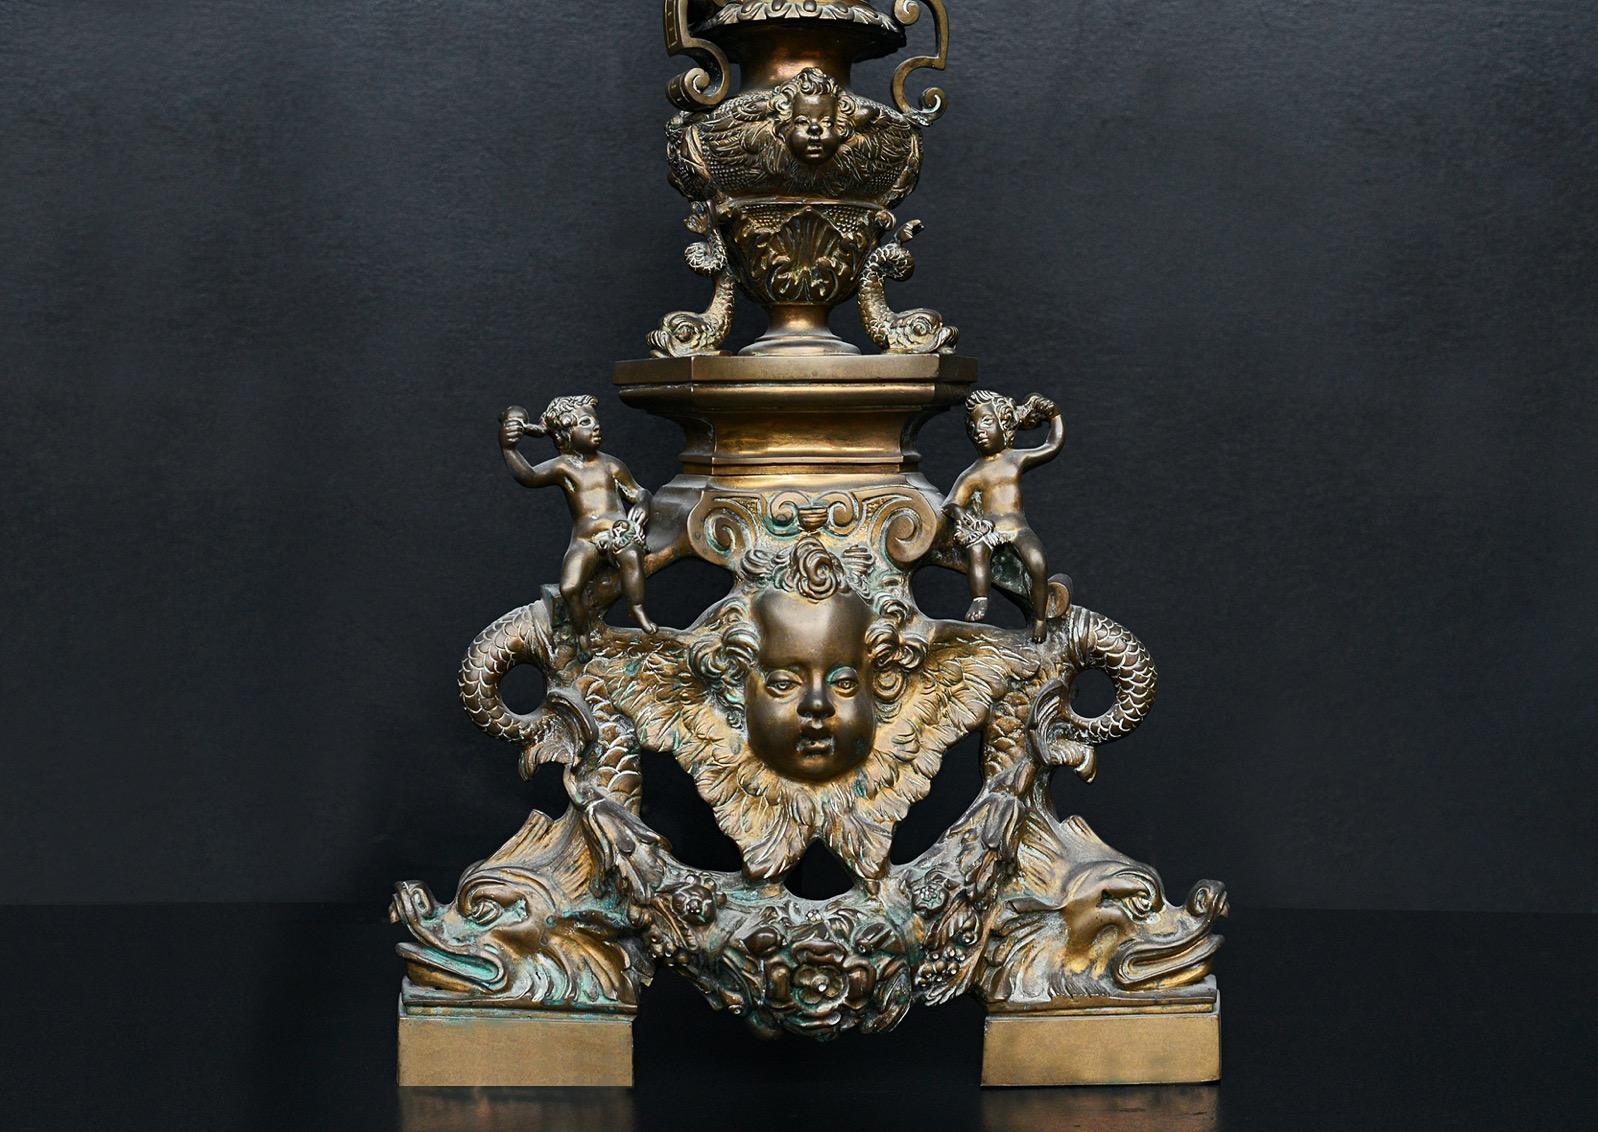 A large pair of ornate brass firedogs. The feet surmounted by dragons, foliage and putti, with urns to central shaft. Classical figures to top. English, 19th century. Currently with aged brass/bronze patina - could be polished to brass if